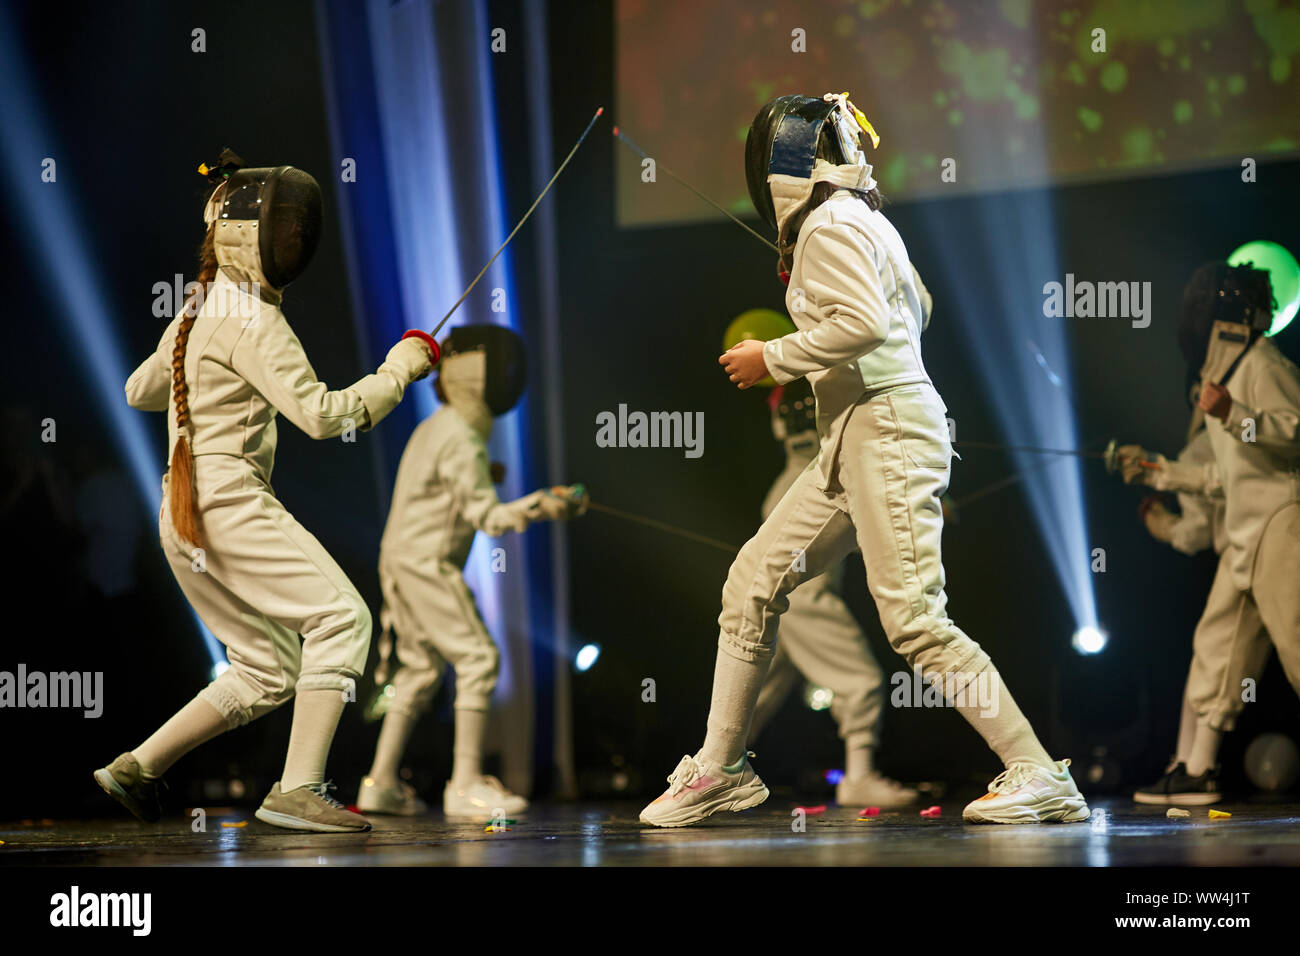 Junior Girls at a foil fencing tournament Stock Photo